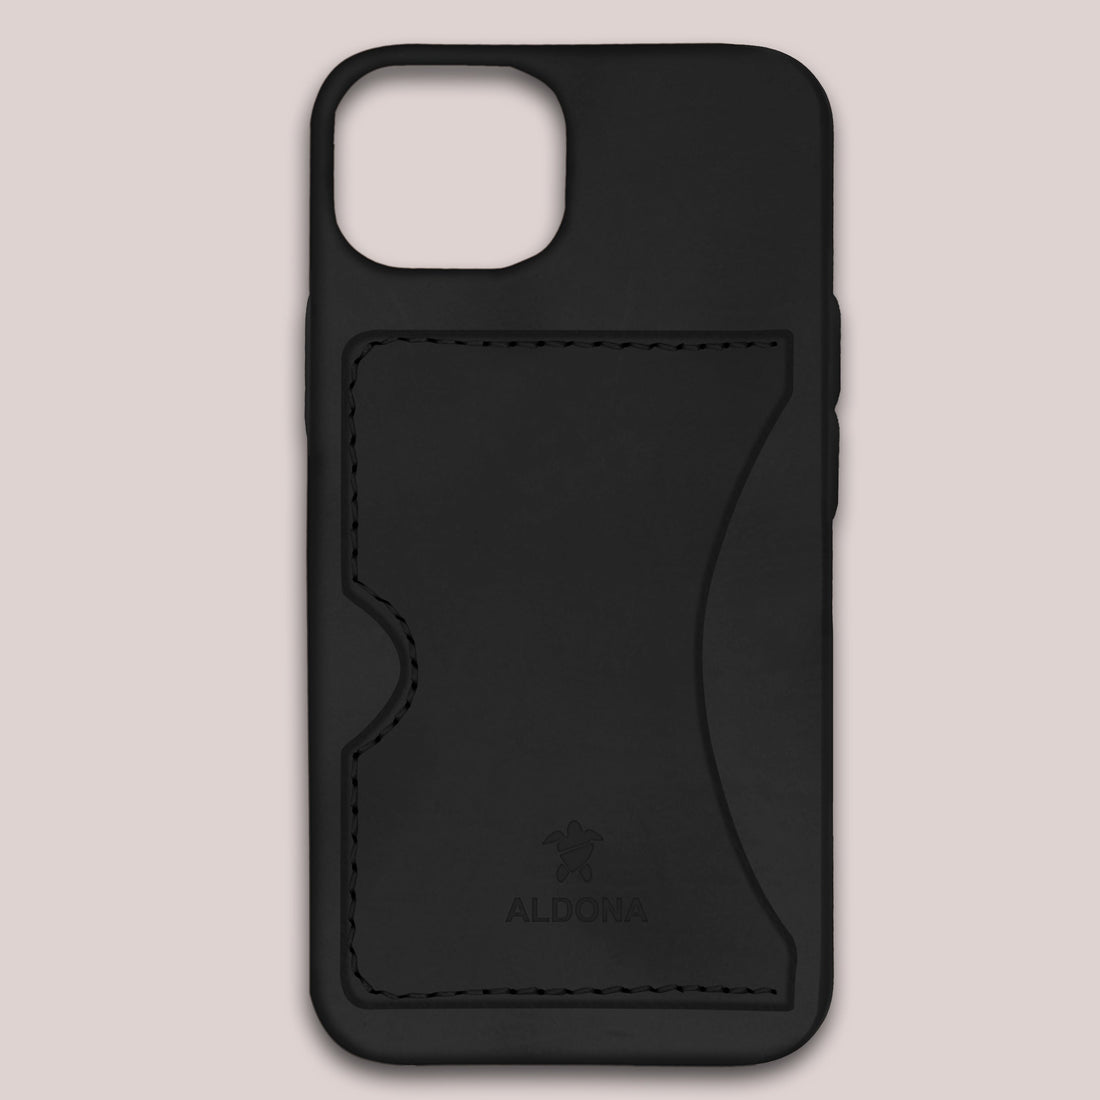 Baxter Card Case for iPhone 12 Pro - Onyx Black